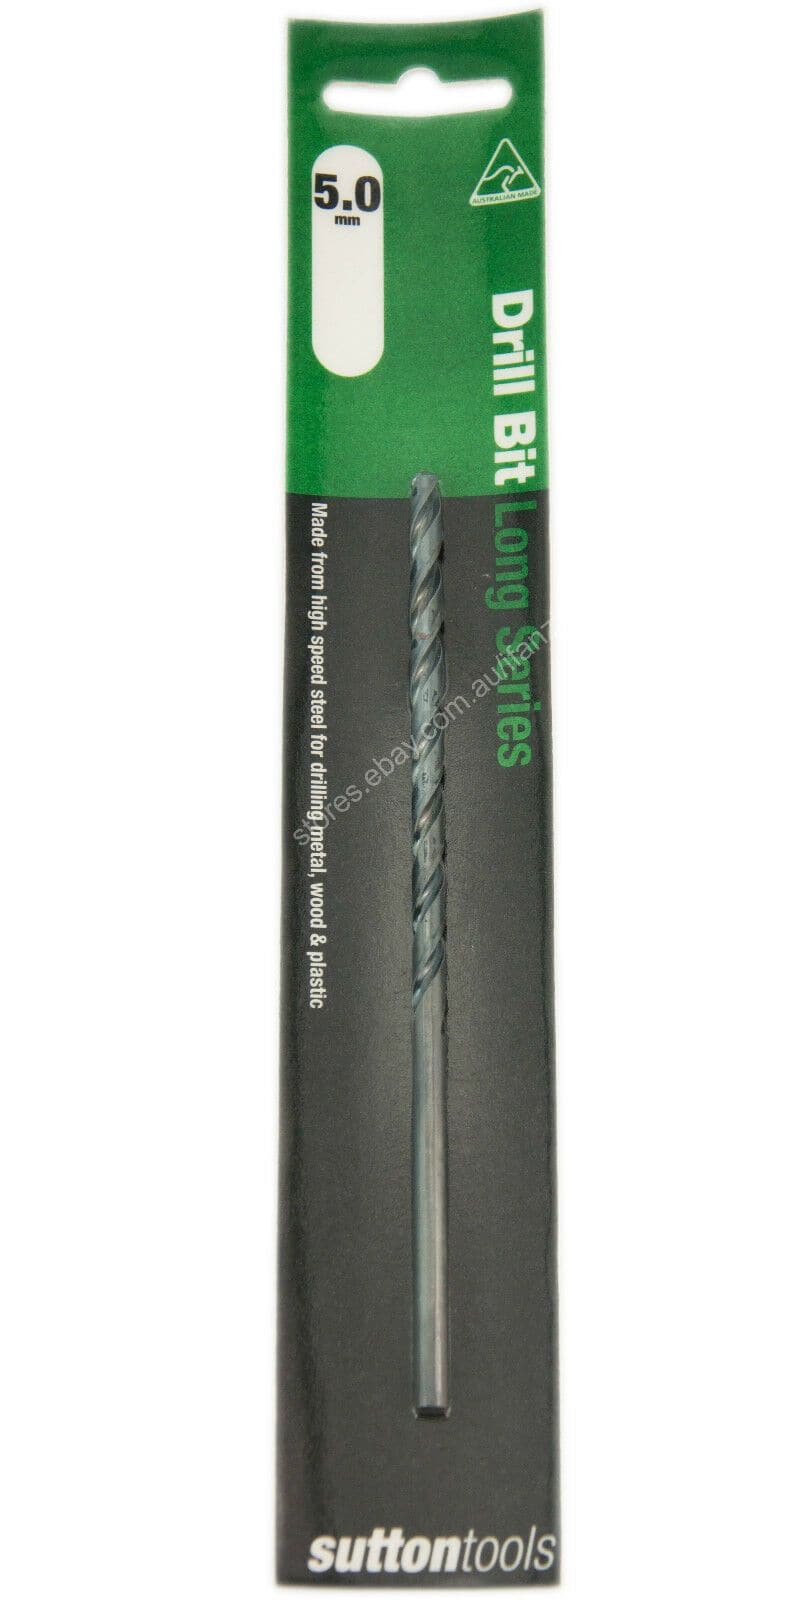 suttontools Metric HSS Long Series Drill Bits For Metal, Wood, Plastic 5mm - Double Bay Hardware